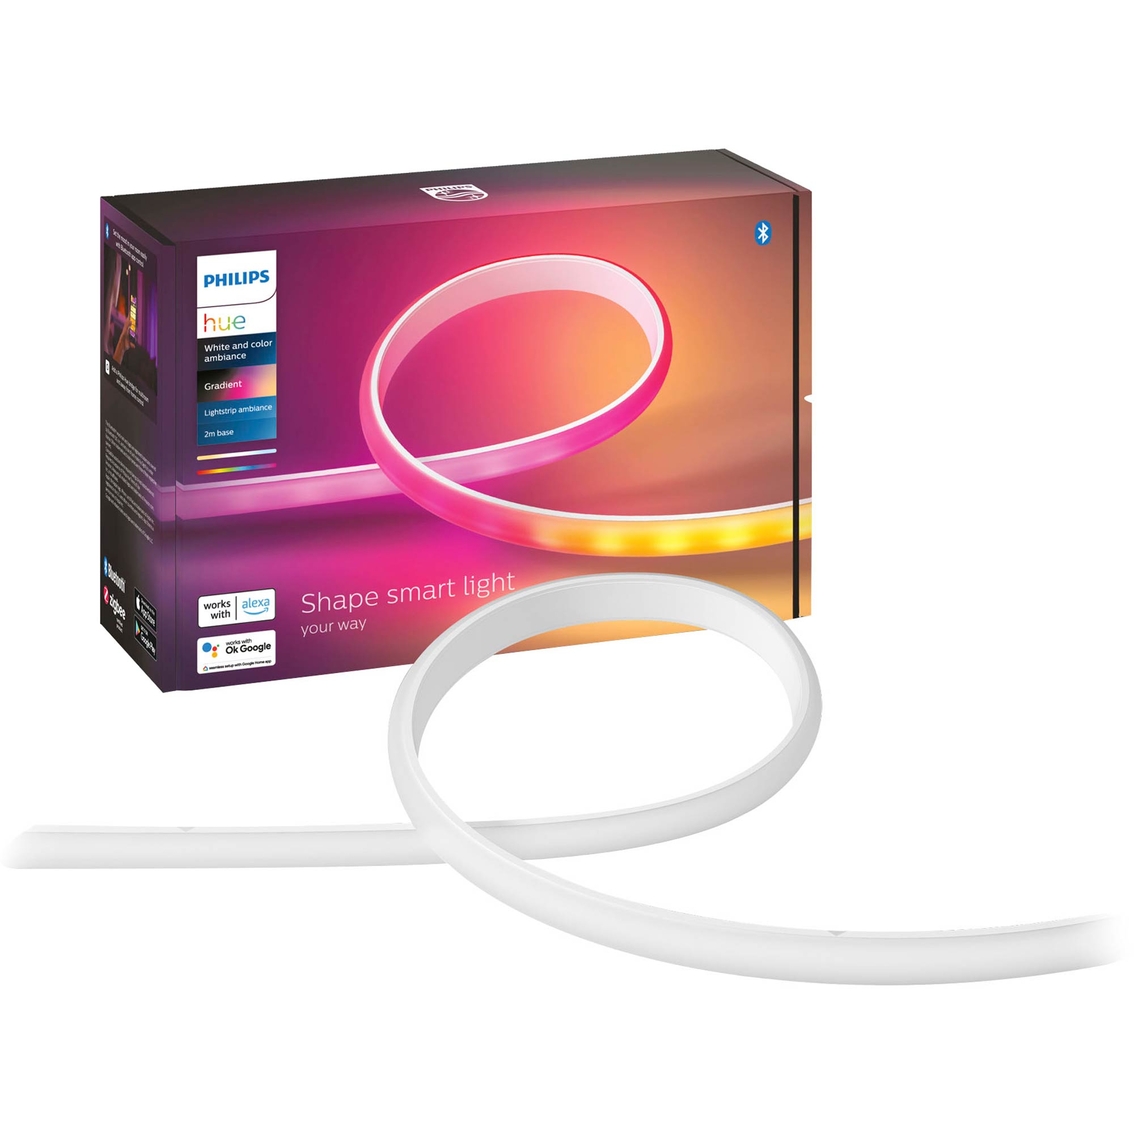 Philips Hue Ambiance Gradient Lightstrip Base - Image 2 of 5